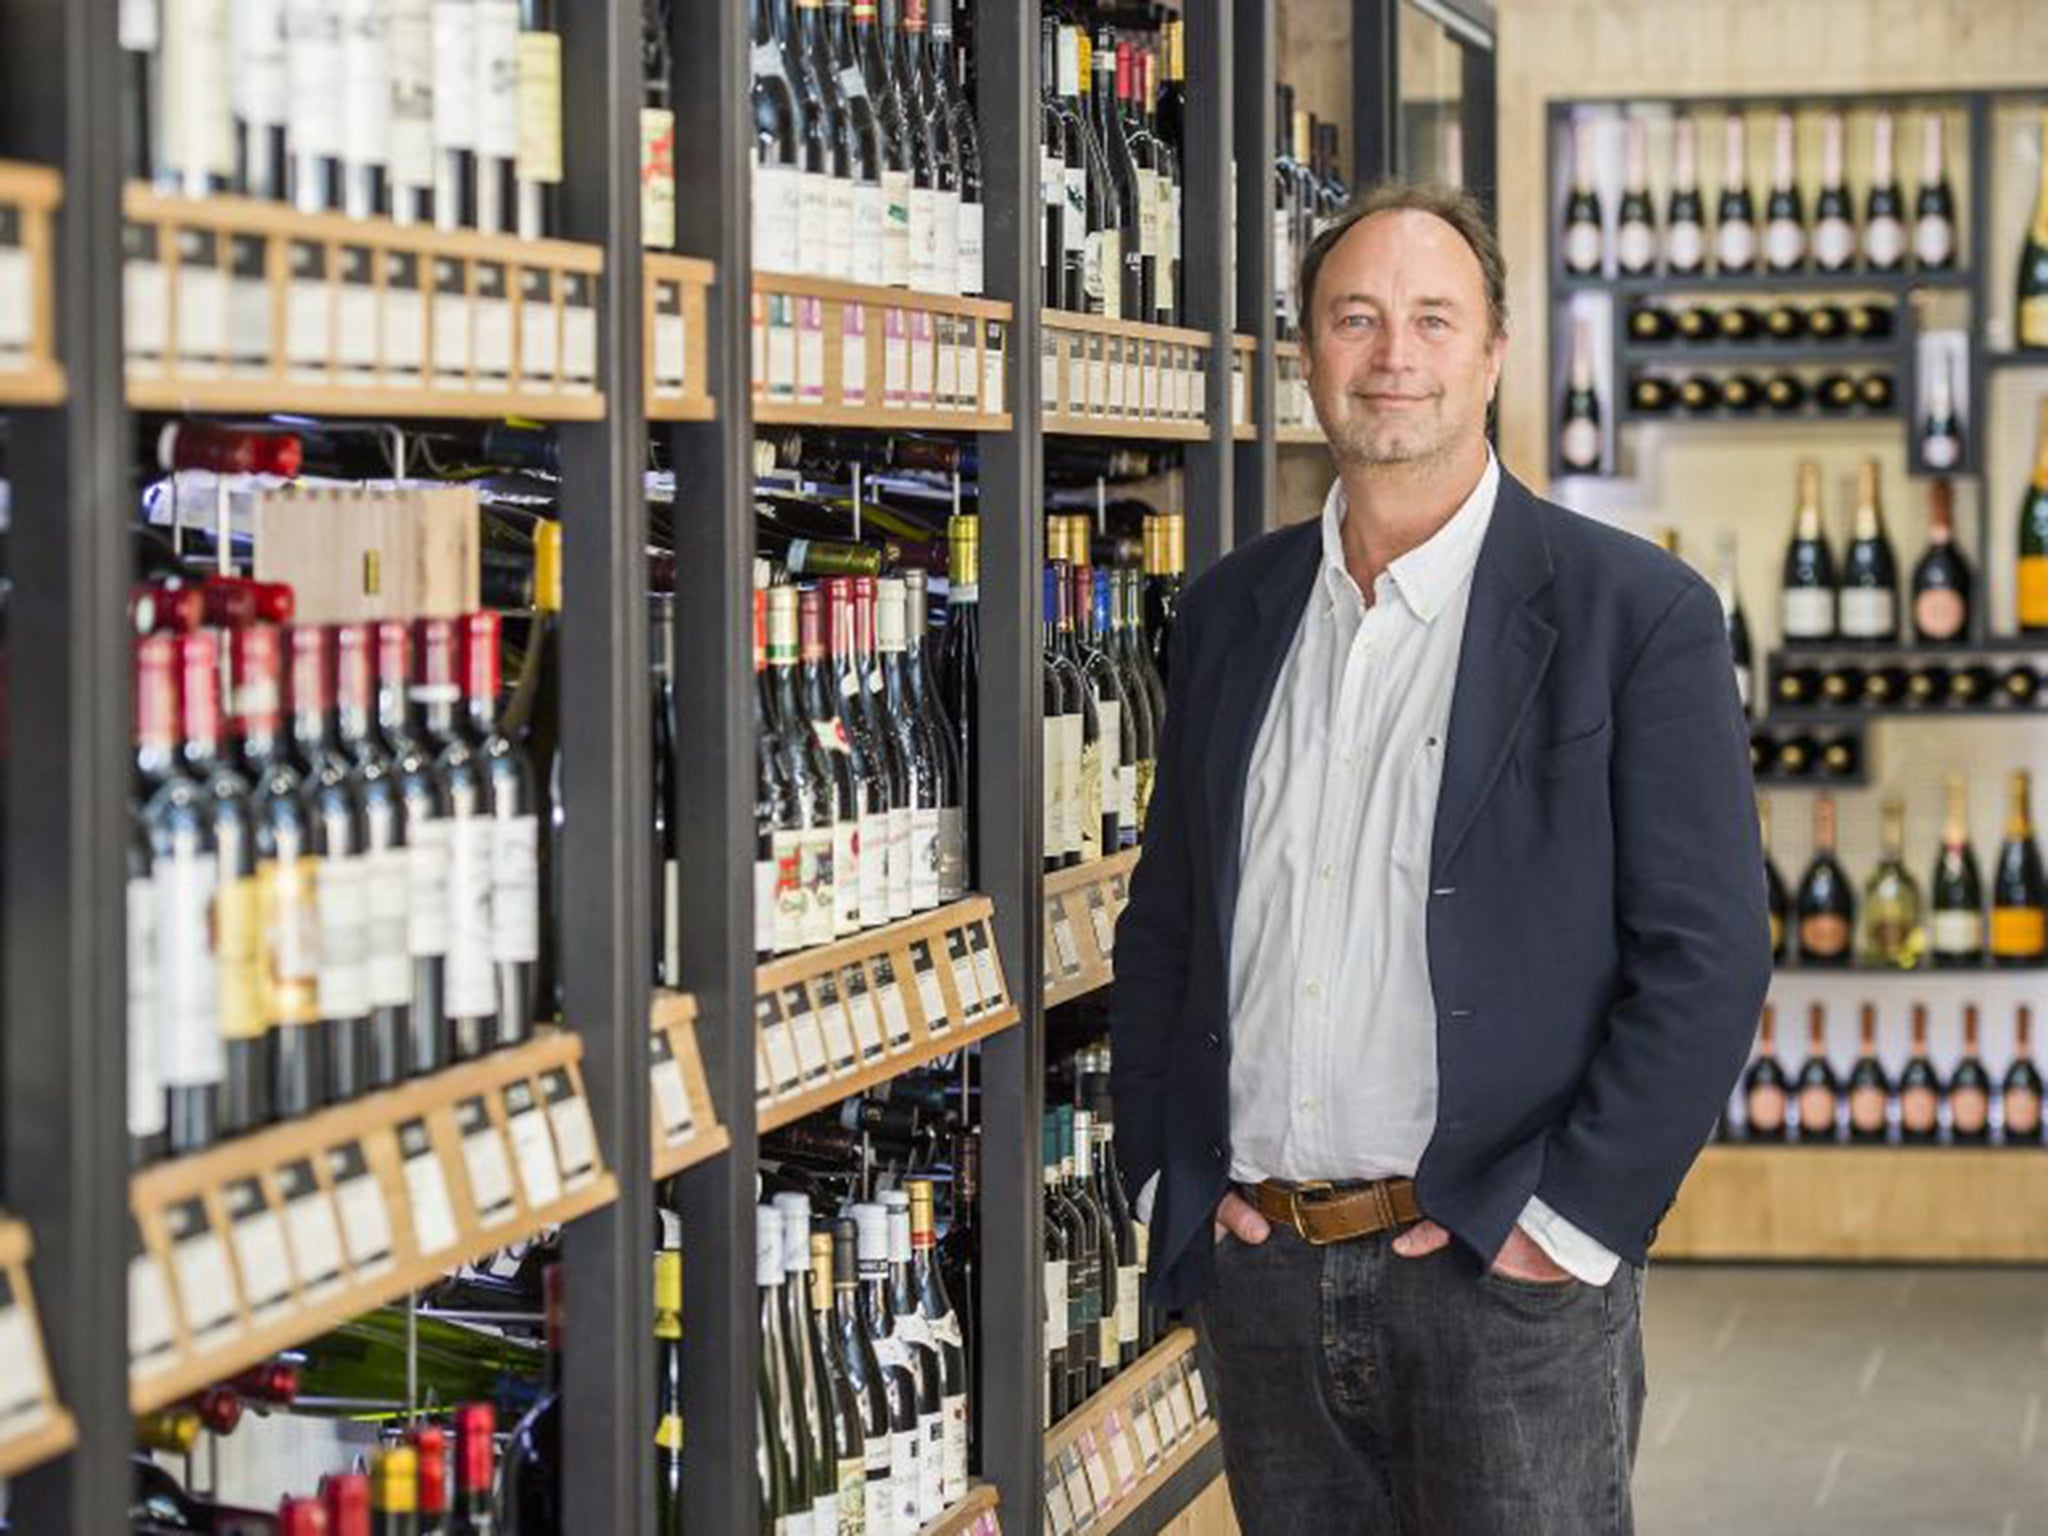 Rowan Gormley has tried to make Majestic's stores sing, but growth has been sluggish lately